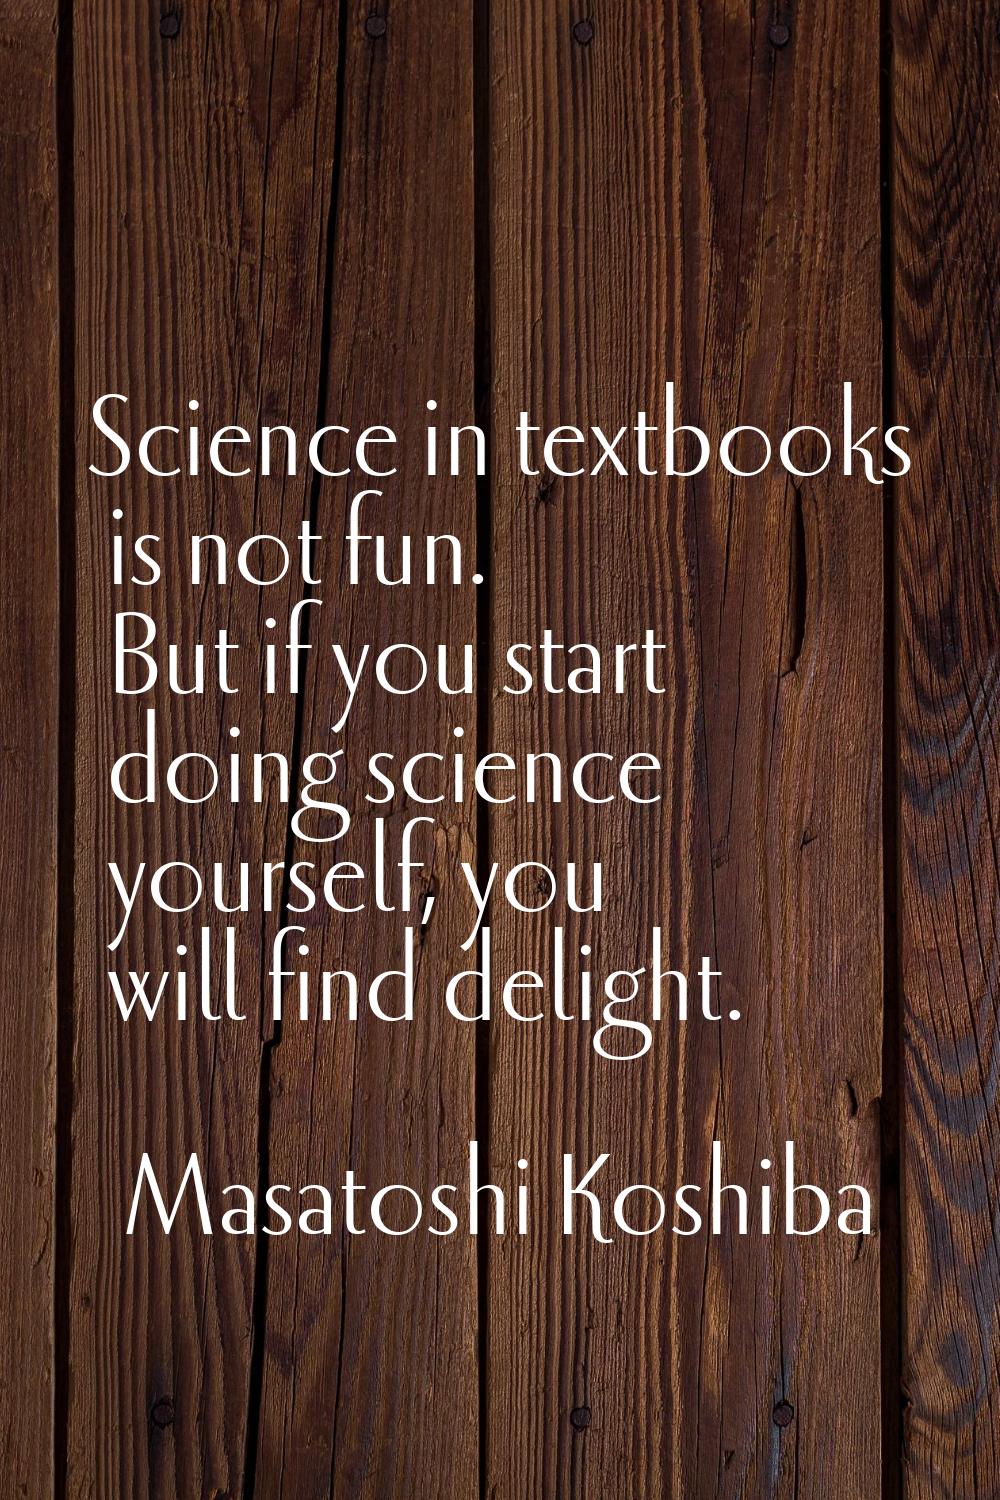 Science in textbooks is not fun. But if you start doing science yourself, you will find delight.